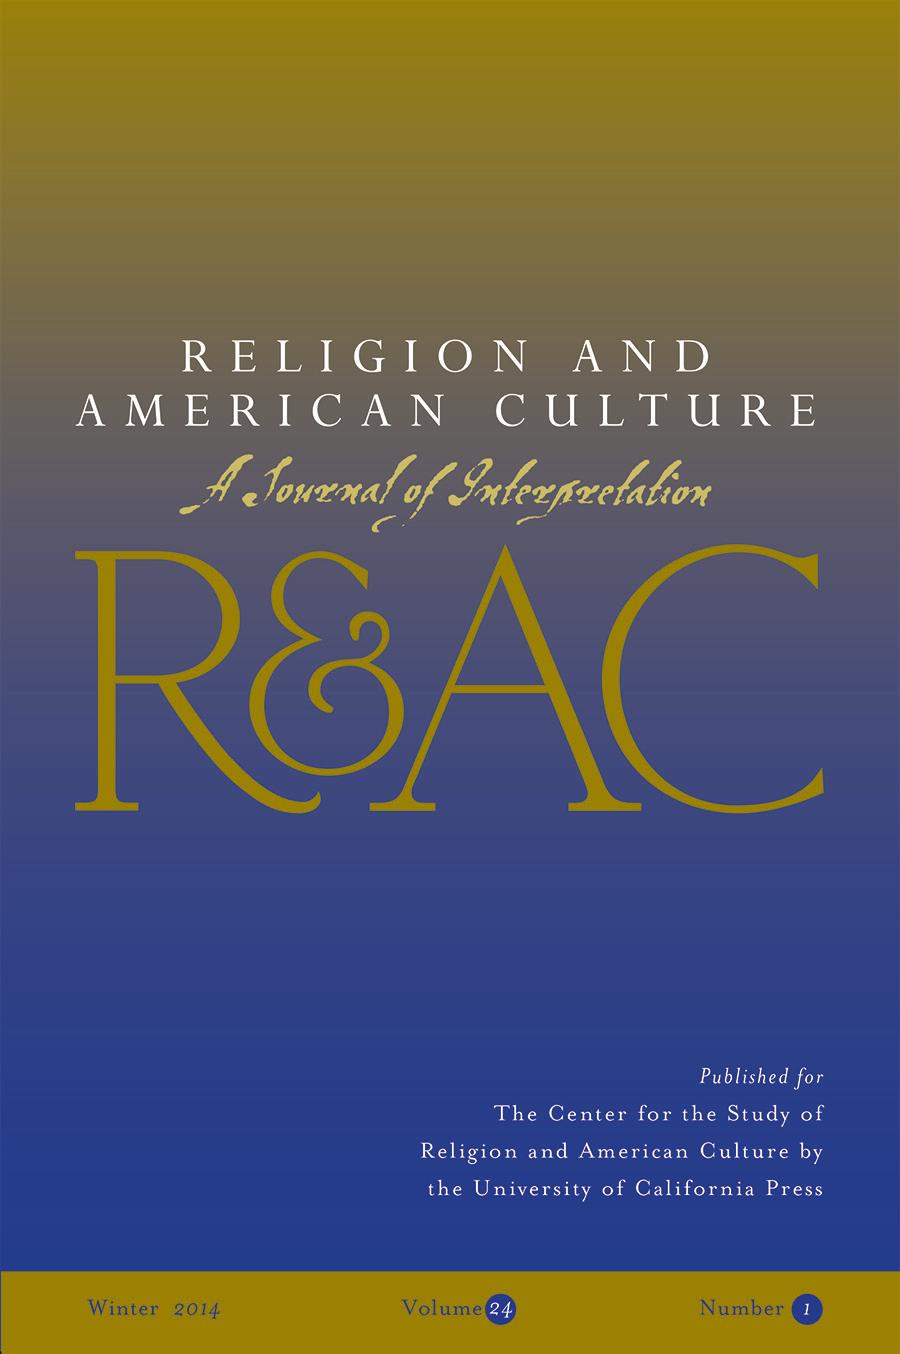 RELIGION AND AMERICAN CULTURE Full page: 4 ½ x 7 ½ $ 385 Half page: 4 ½ x 3 ¾ $ 300 Cover 3: 4 ½ x 7 ½ $ 450 January November 15 December 1 July May 15 June 1 RELIGION AND AMERICAN CULTURE: A JOURNAL